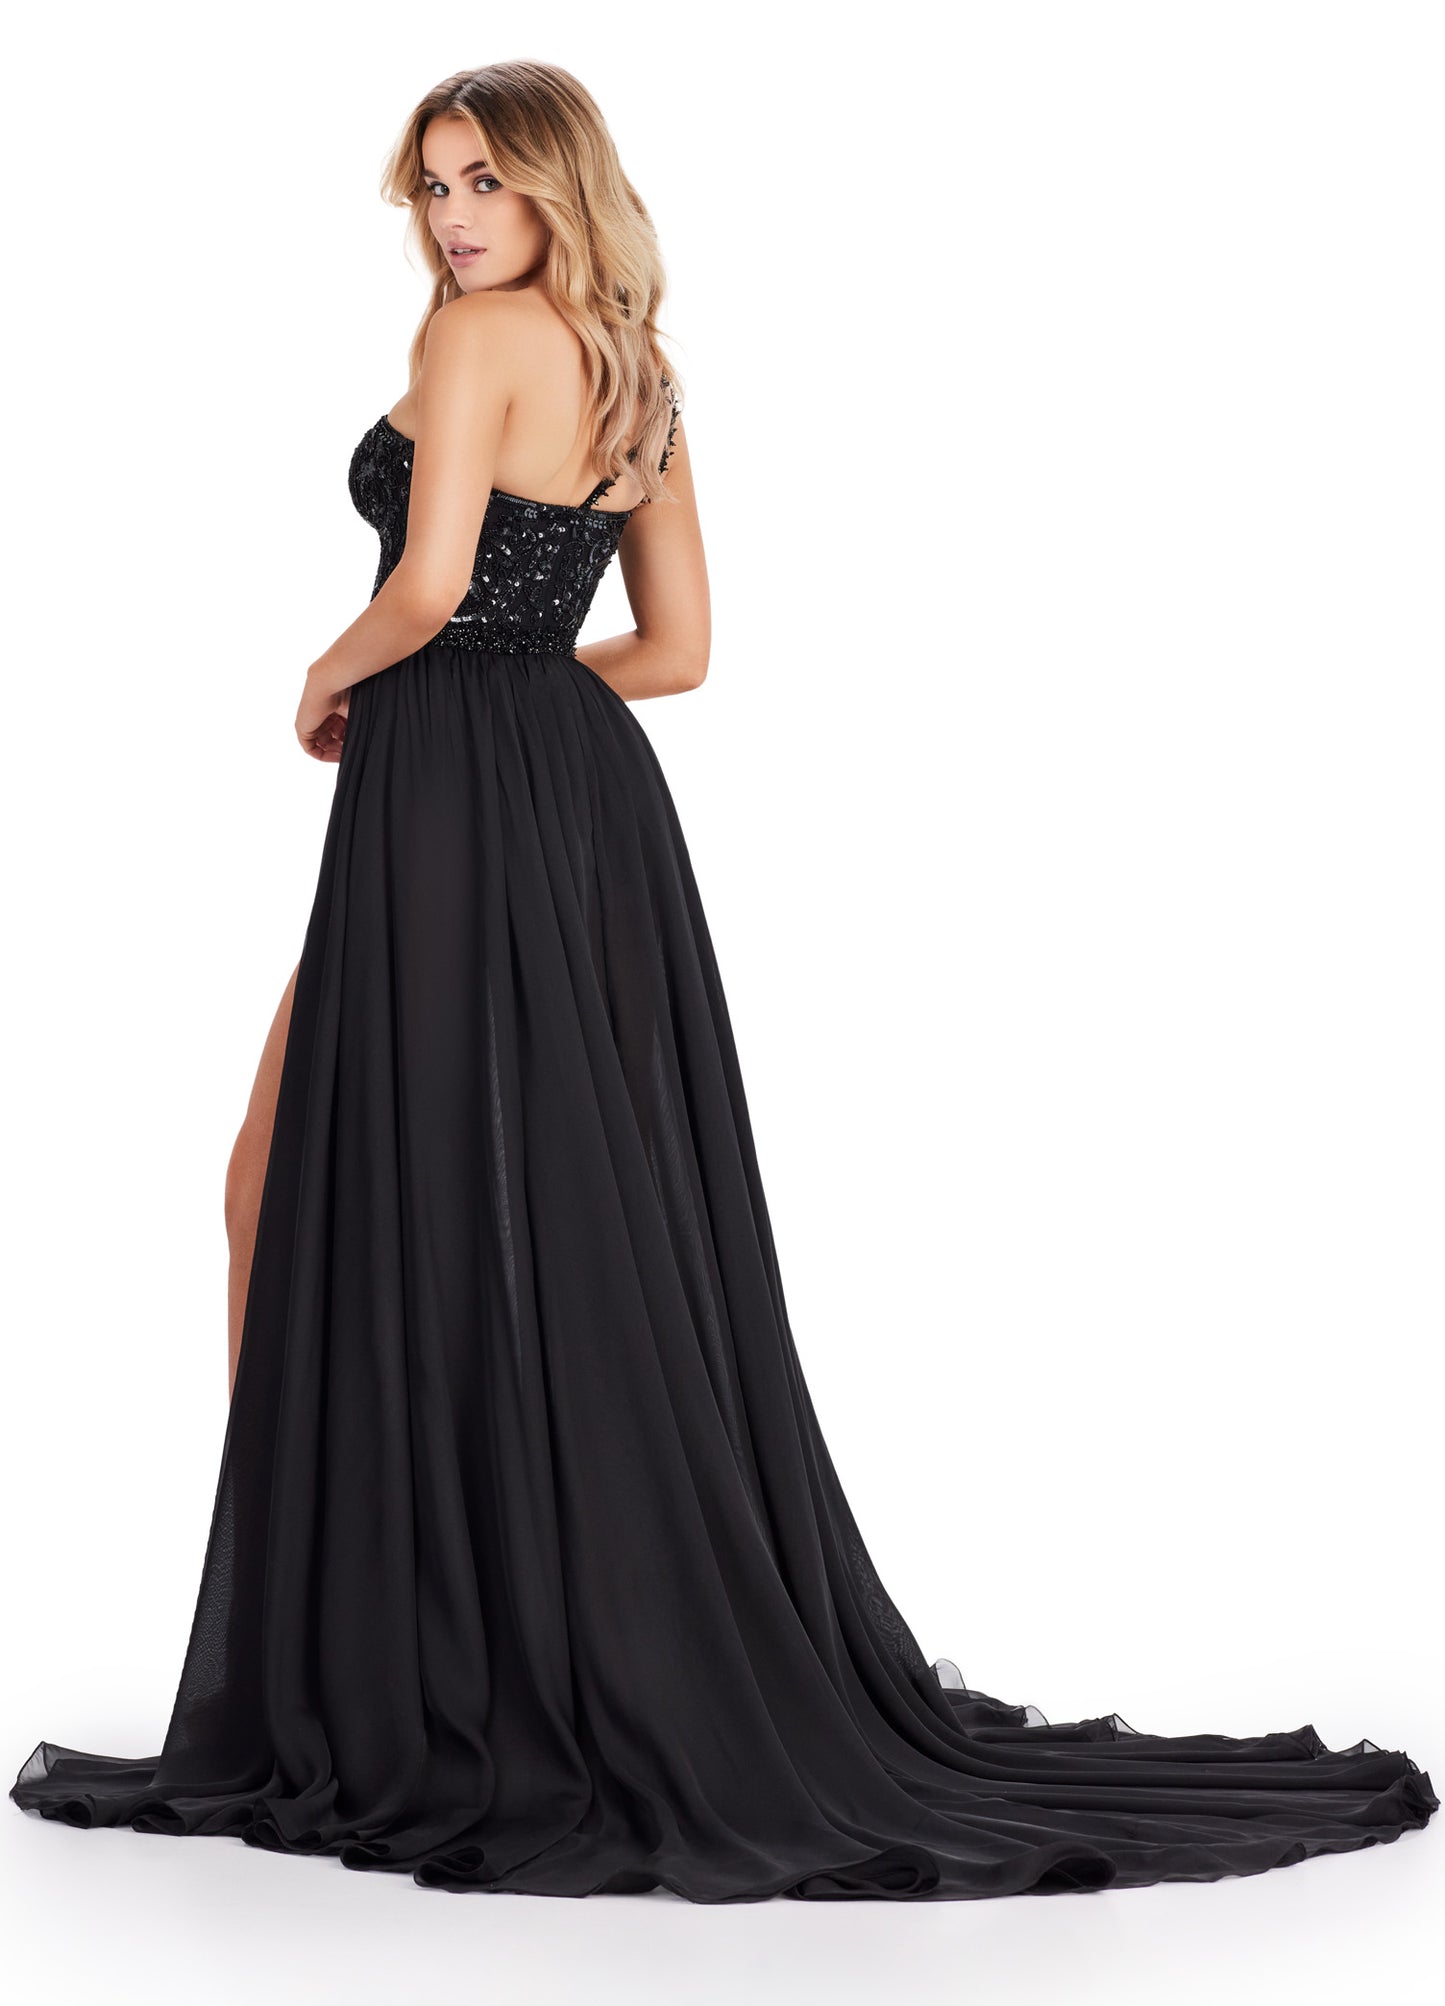 Expertly crafted for maximum impact, the Ashley Lauren 11460 Long Prom Dress is a show-stopping choice for any formal event. The one shoulder beaded bodysuit adds a touch of glamour, while the chiffon overskirt exudes elegance. Trust in Ashley Lauren's expertise for a flawless look. Dare to be different in this fabulous one shoulder beaded bodysuit with a detached chiffon overskirt. The skirt features a waist-high slit to give that perfect amount of drama!